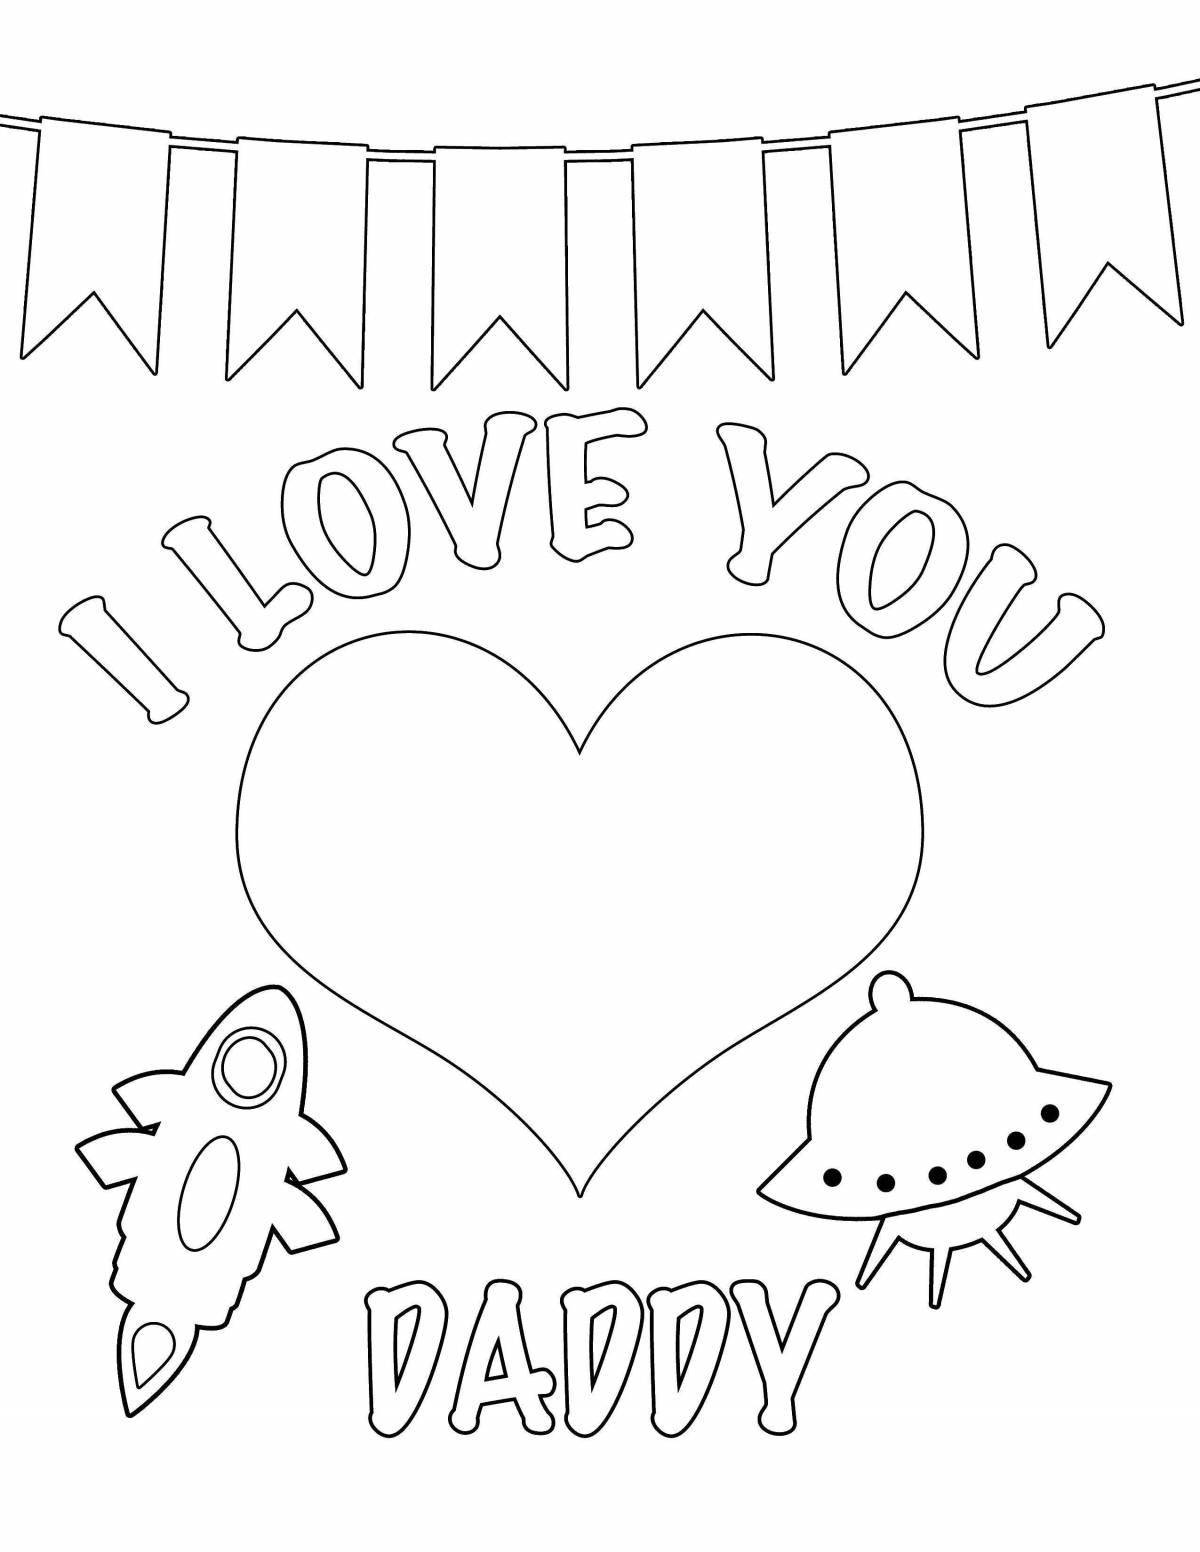 Exquisite i love you dad coloring page